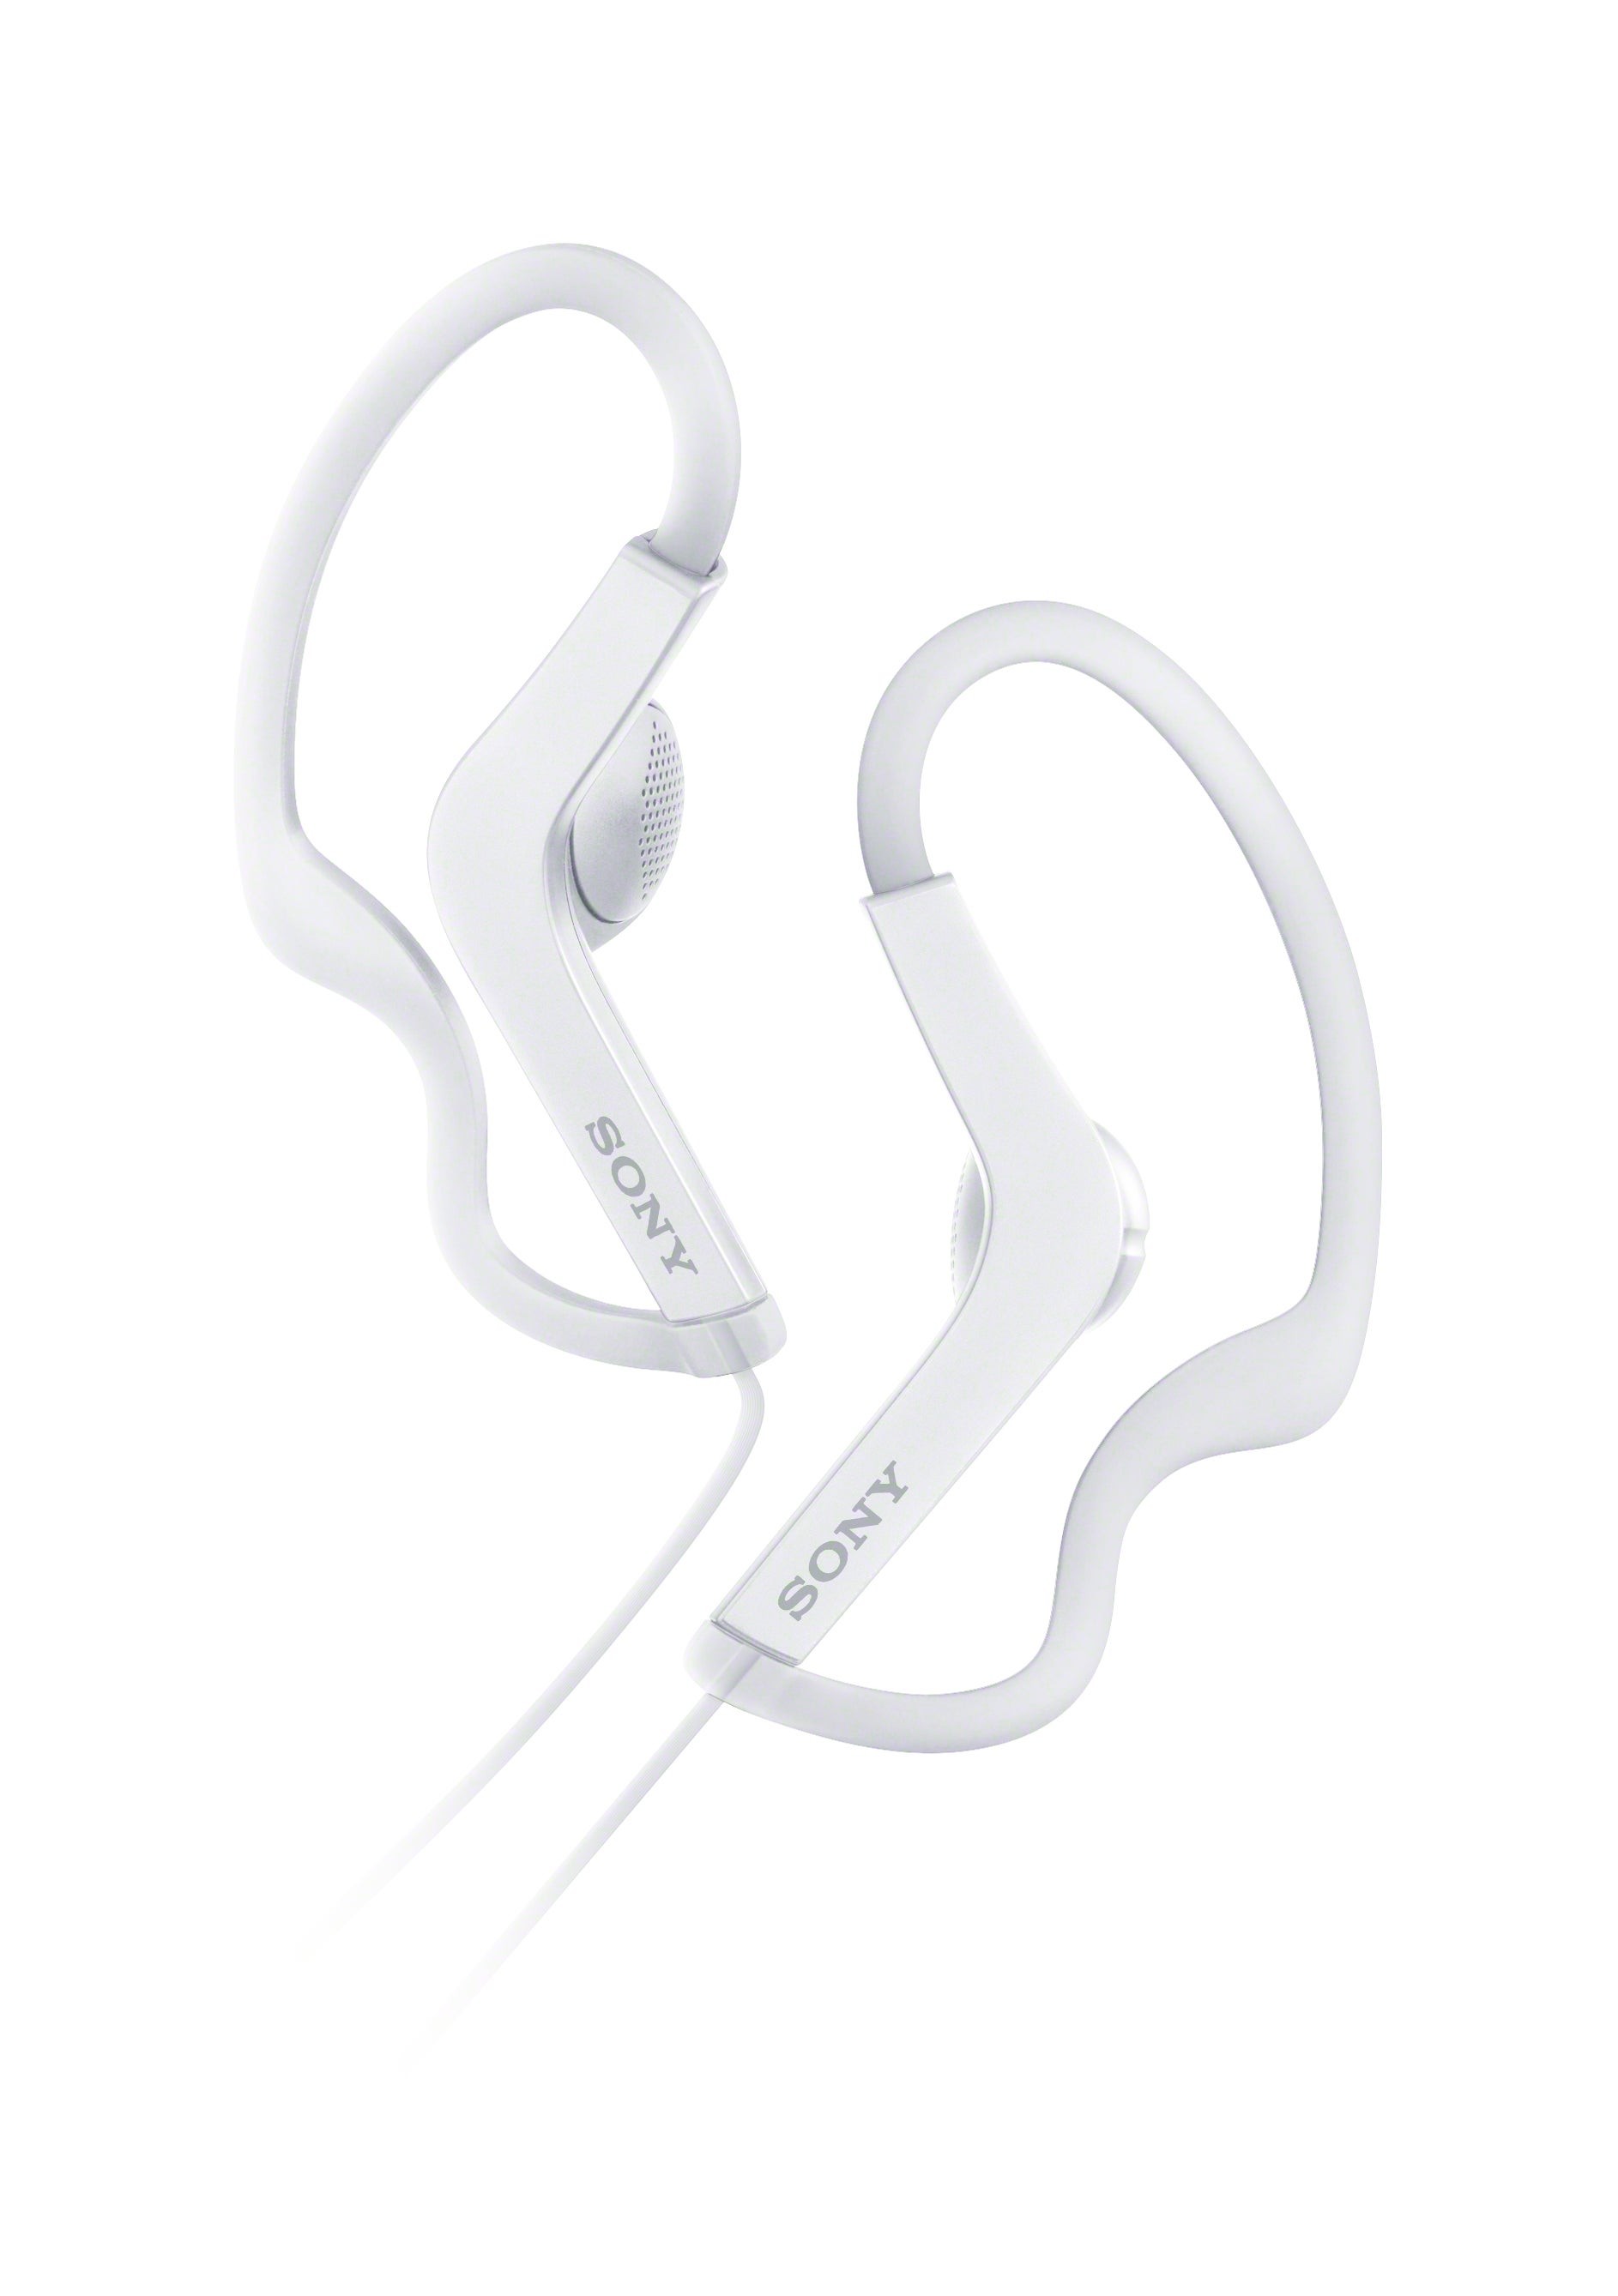 AS210 Sport Corded Earbuds White